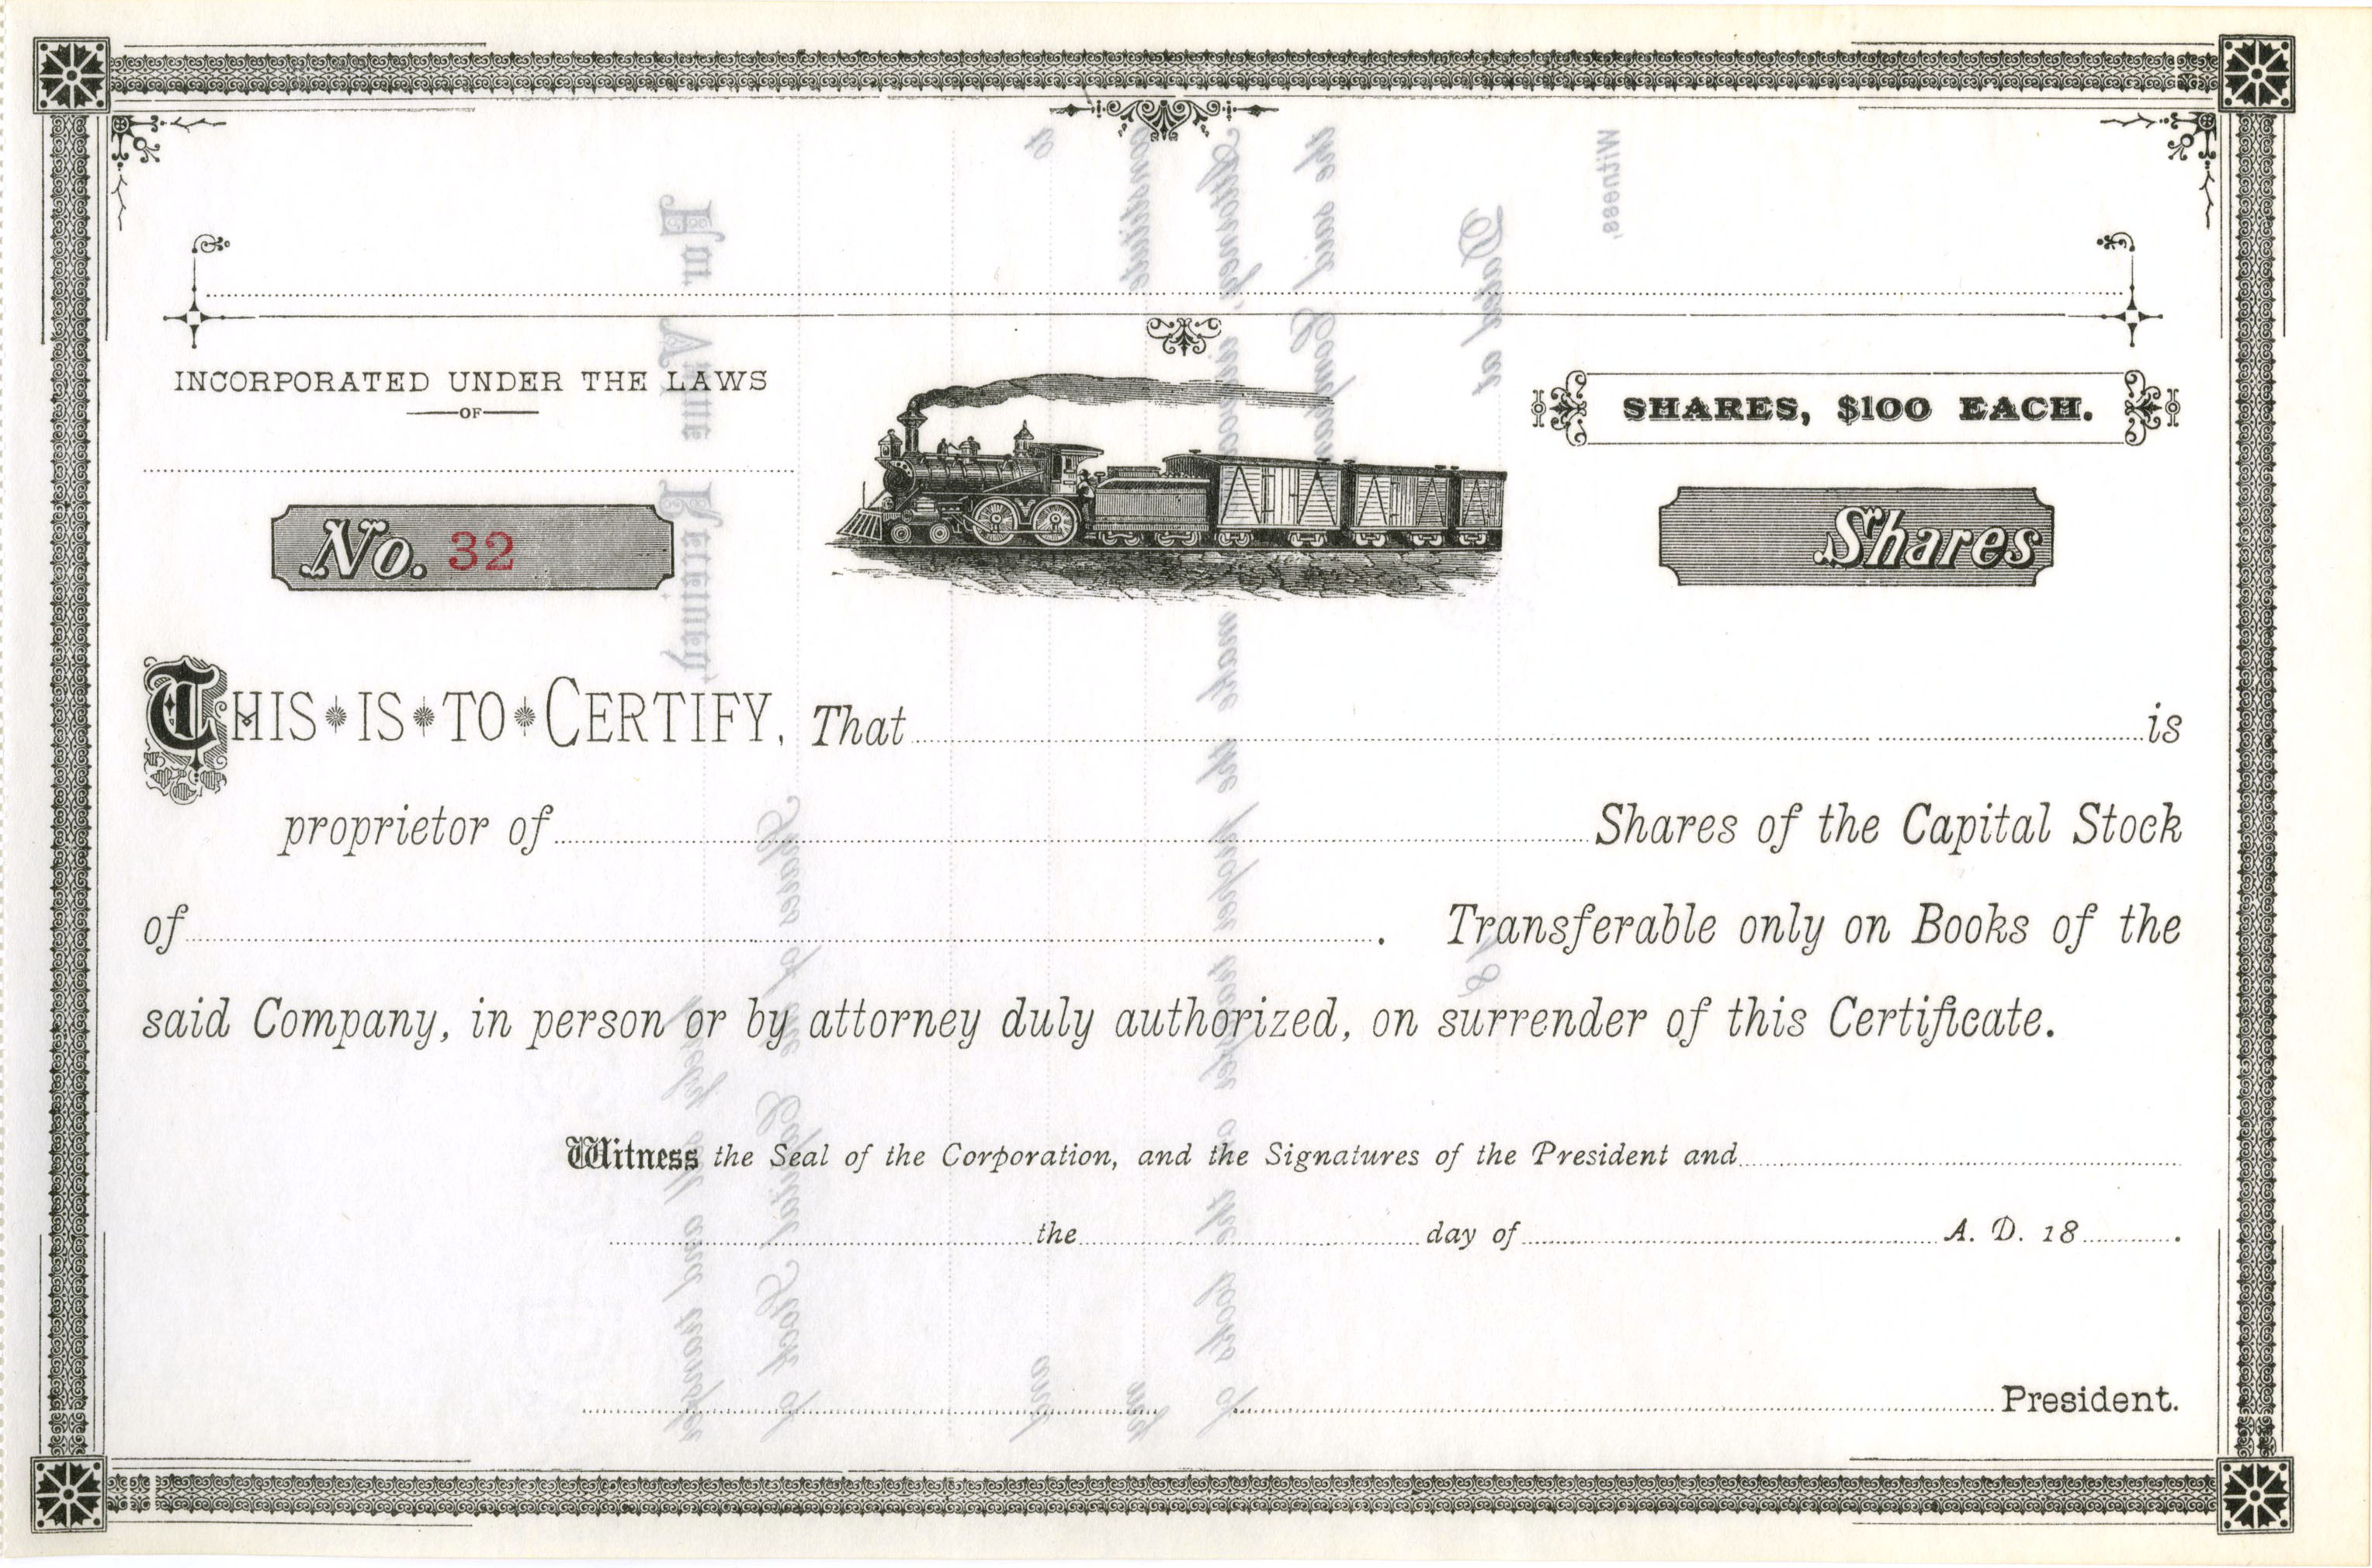 Infrequently-used generic railroad certificate